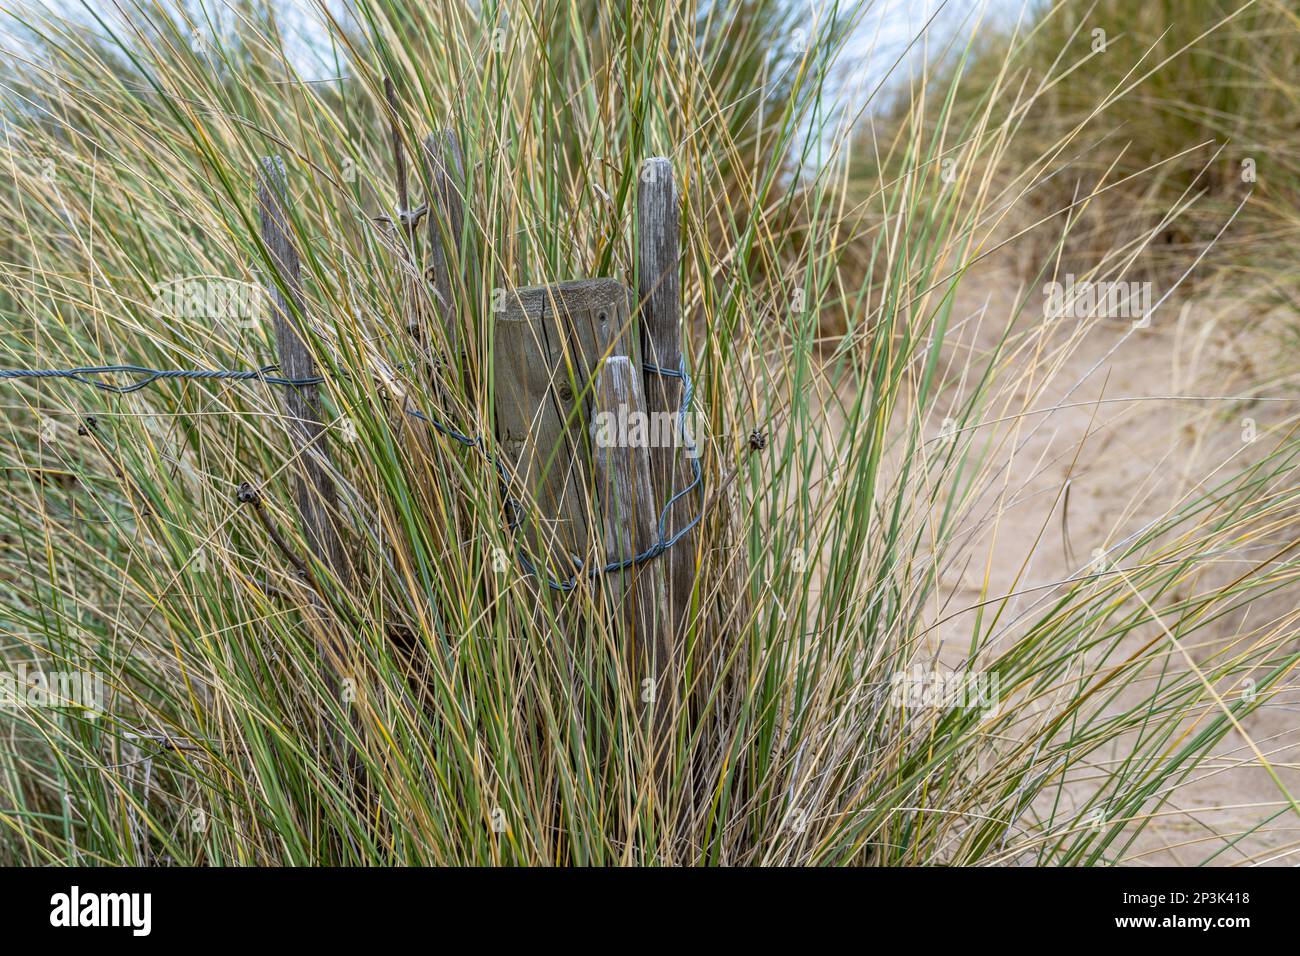 Maram grass in the sand dunes with wooden and wire fence to hold back wind blown sands Stock Photo